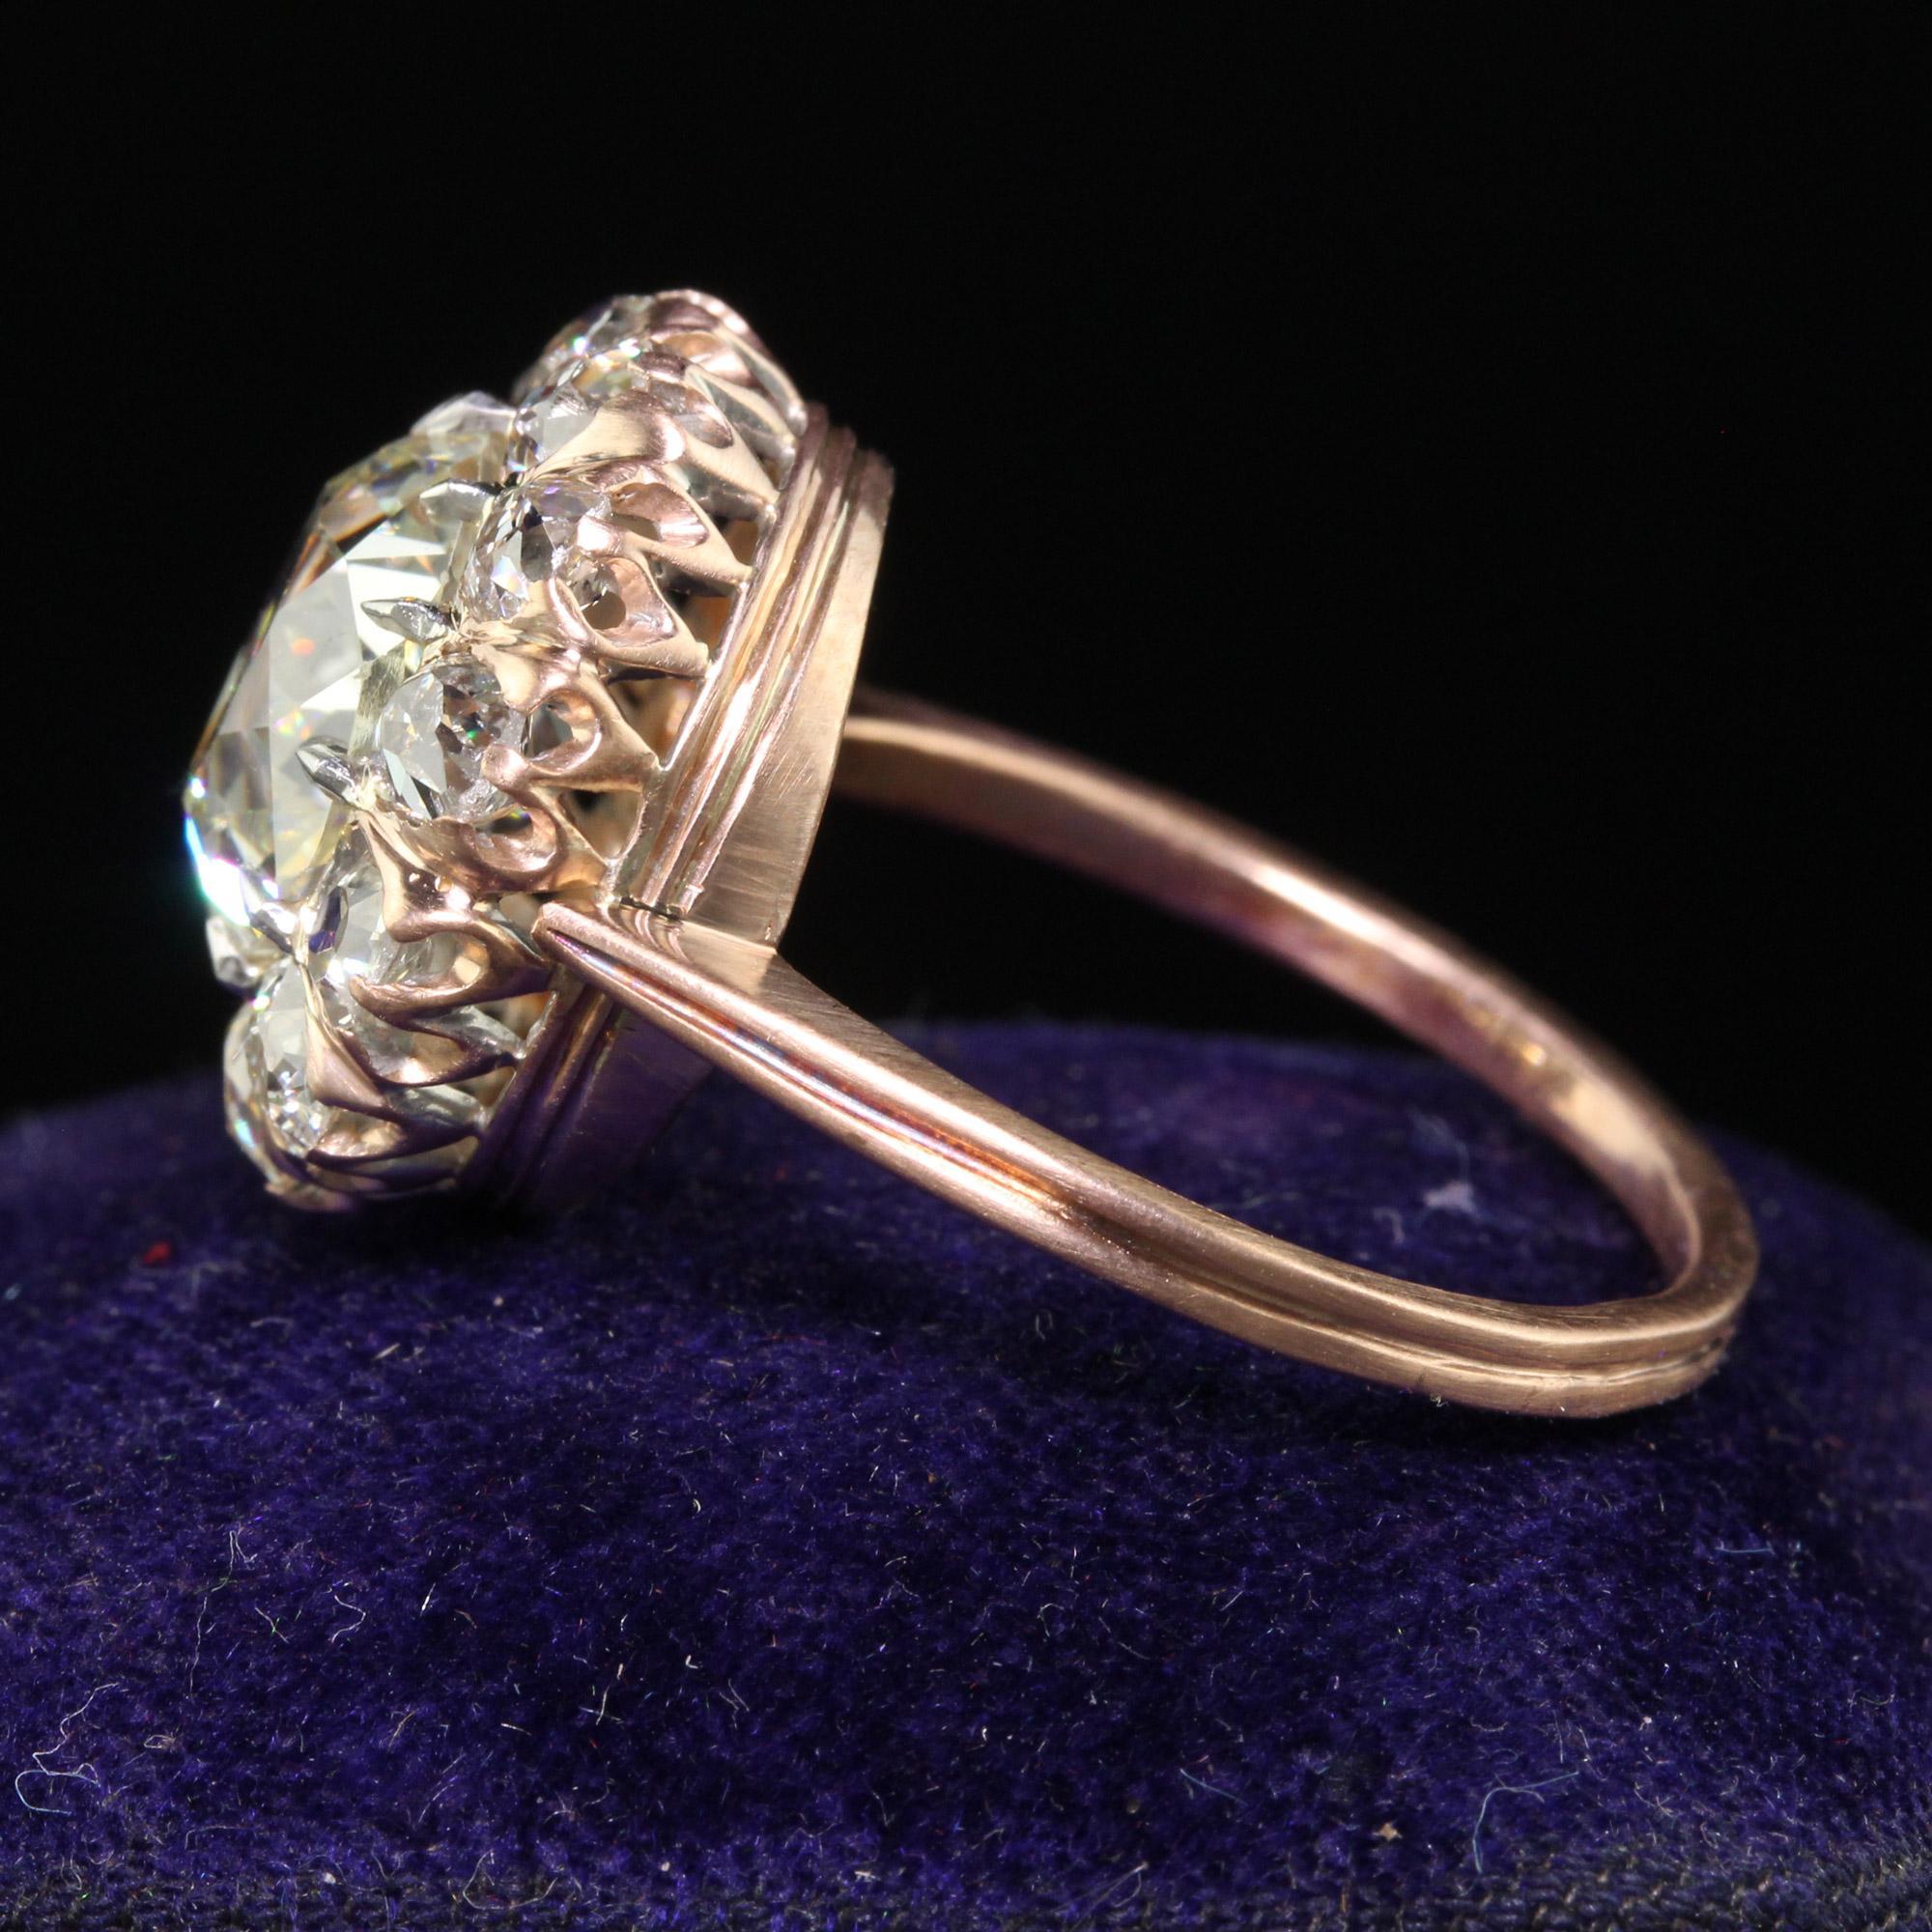 Antique Edwardian 14K Rose Gold Old European Diamond Halo Engagement Ring - GIA In Good Condition For Sale In Great Neck, NY